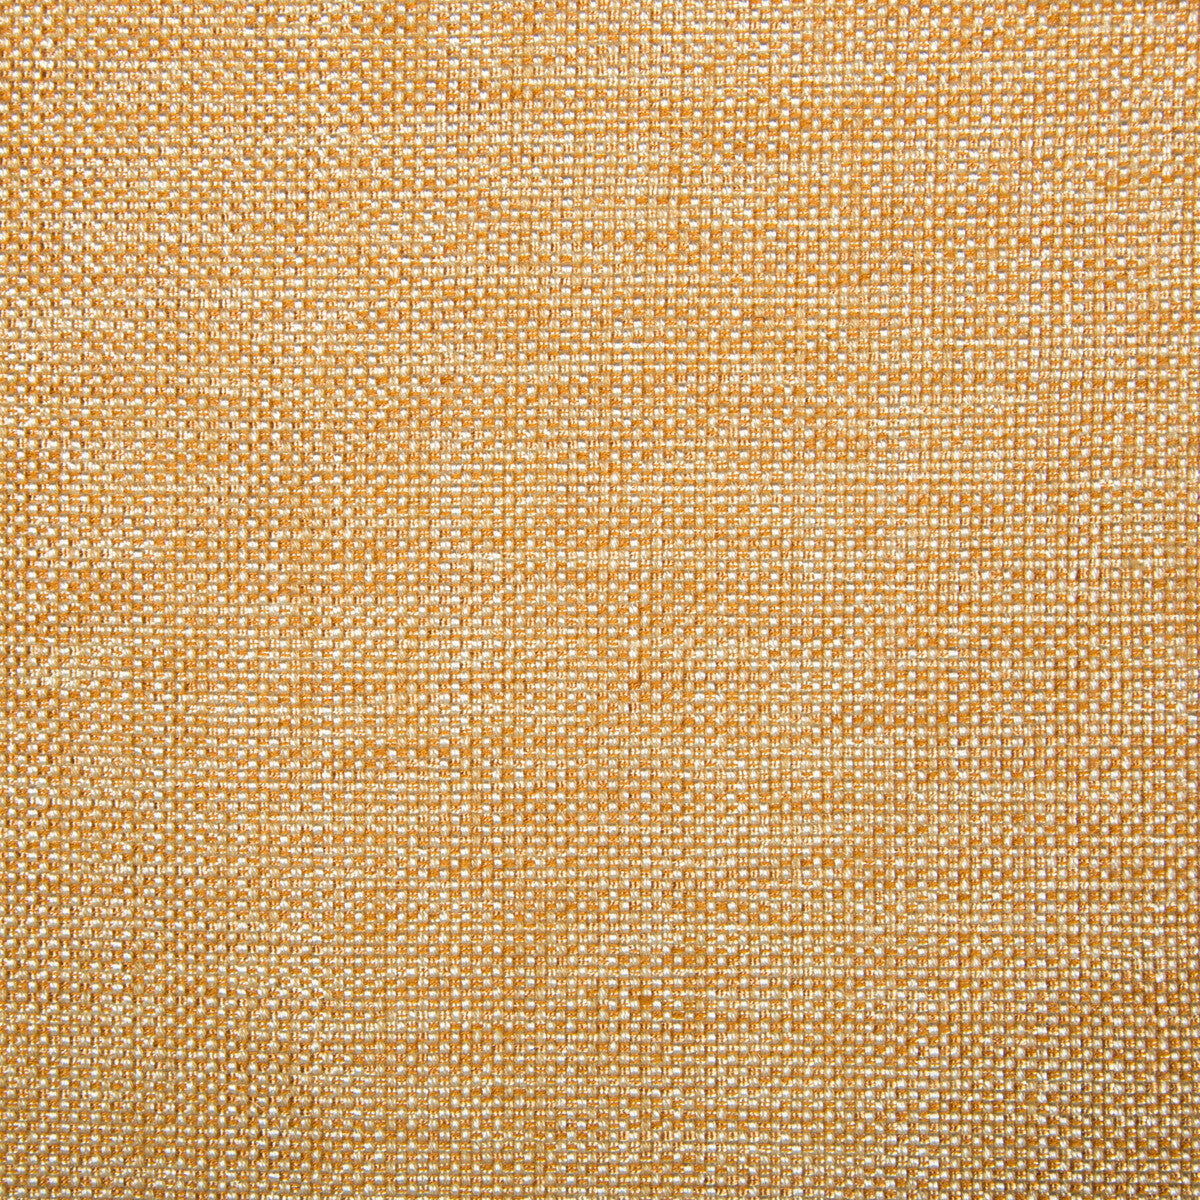 Kravet Contract fabric in 4458-1211 color - pattern 4458.1211.0 - by Kravet Contract